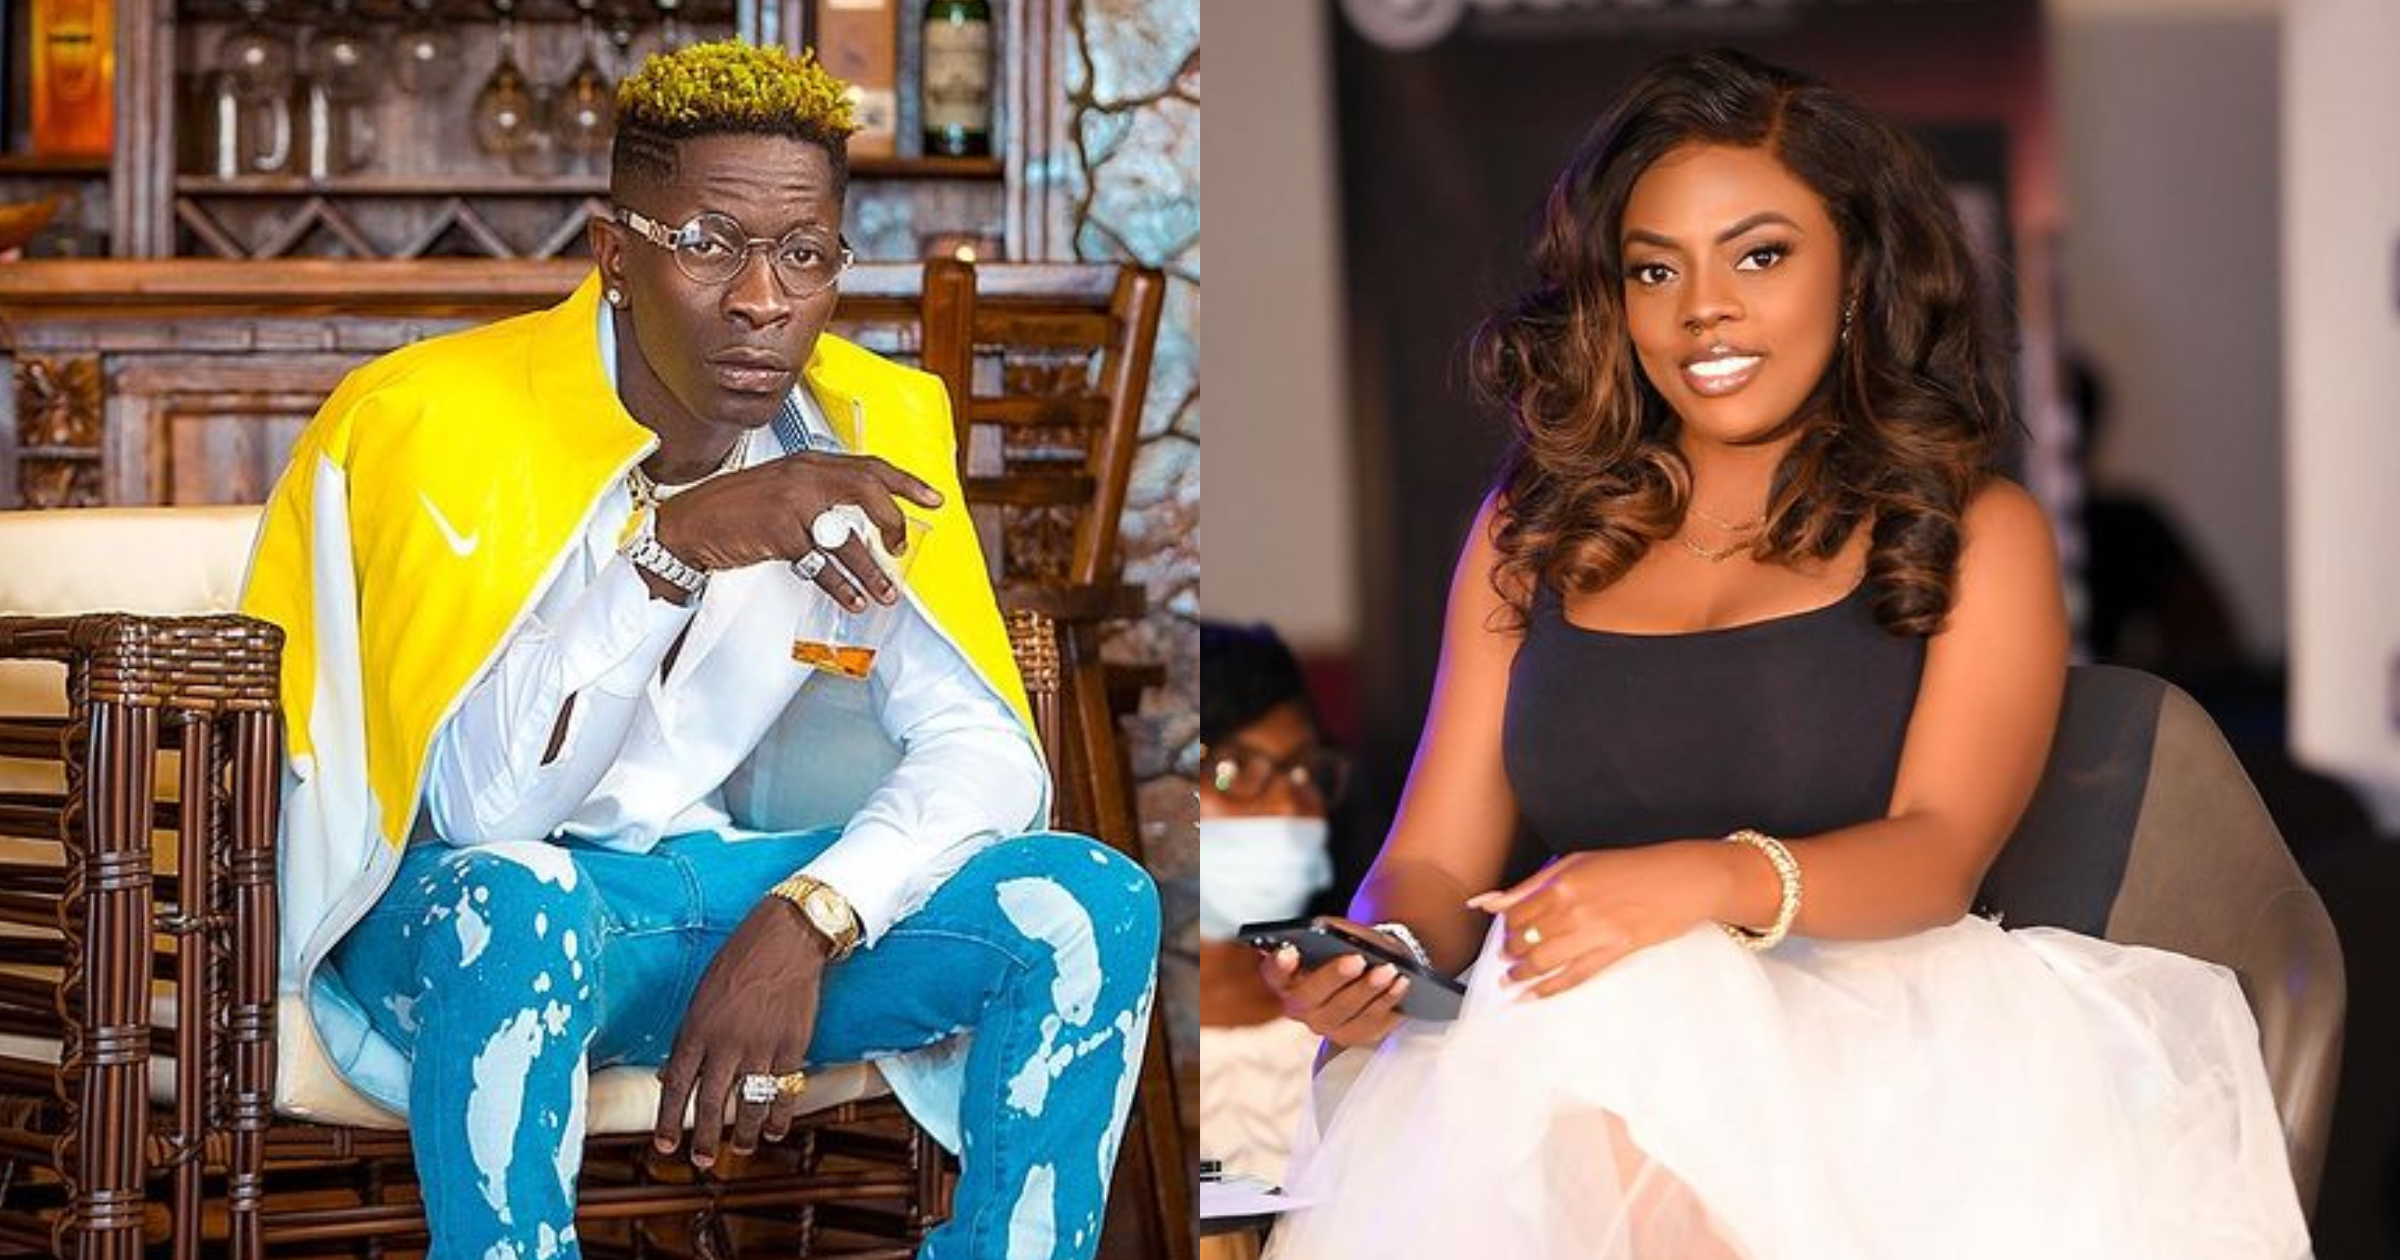 Nana Aba Anamoah shouts as Shatta Wale asks her question about lovemaking